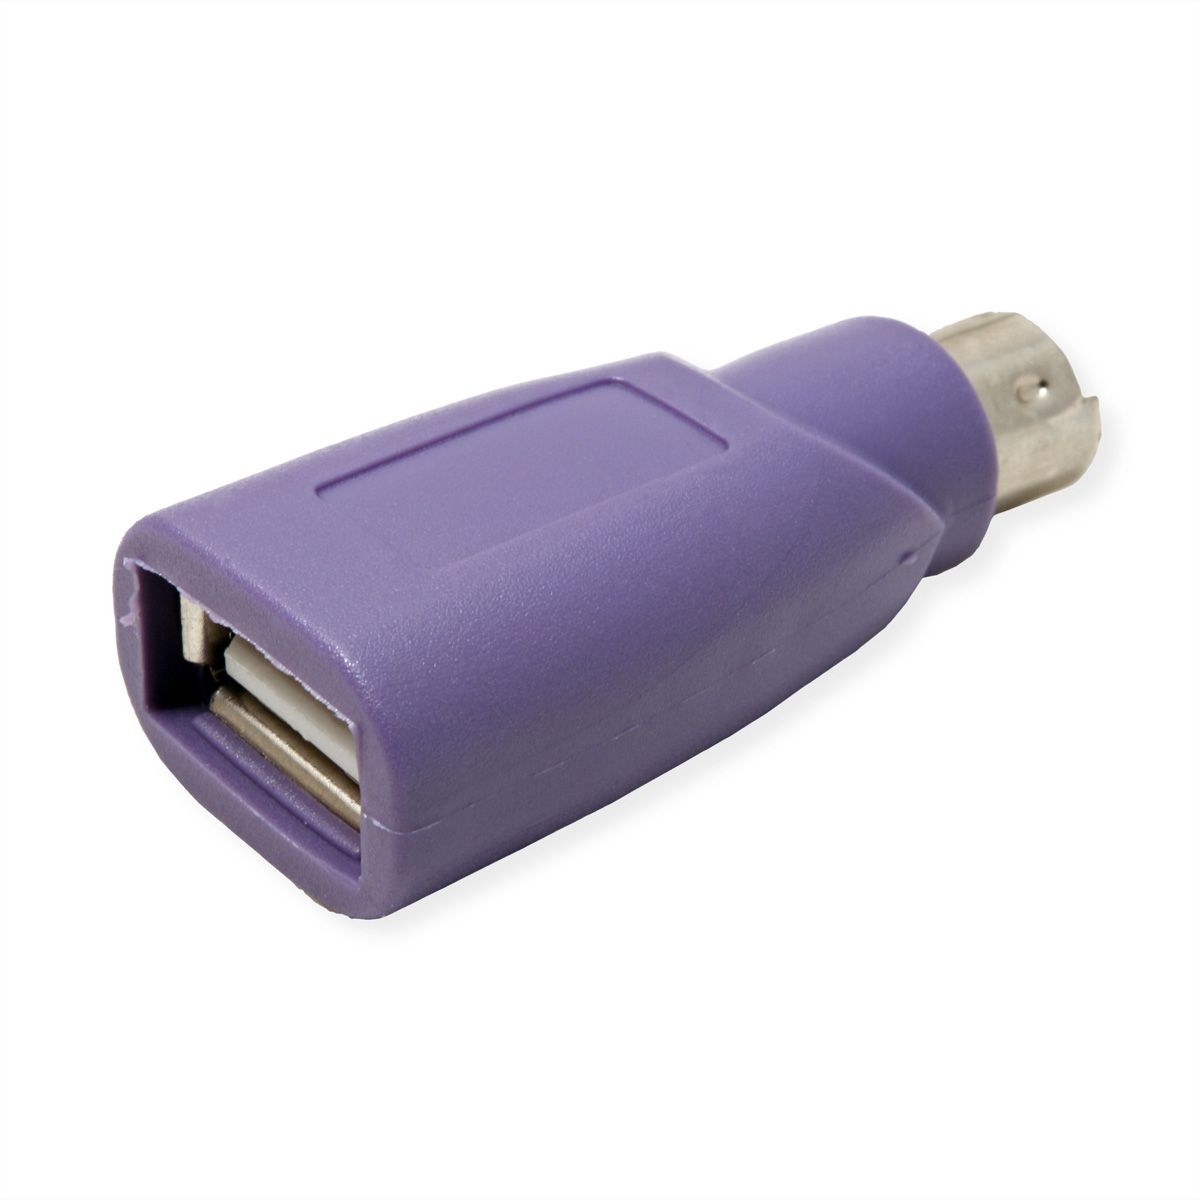 VALUE PS/2 to USB Adapter, Keyboard, purple - SECOMP International AG